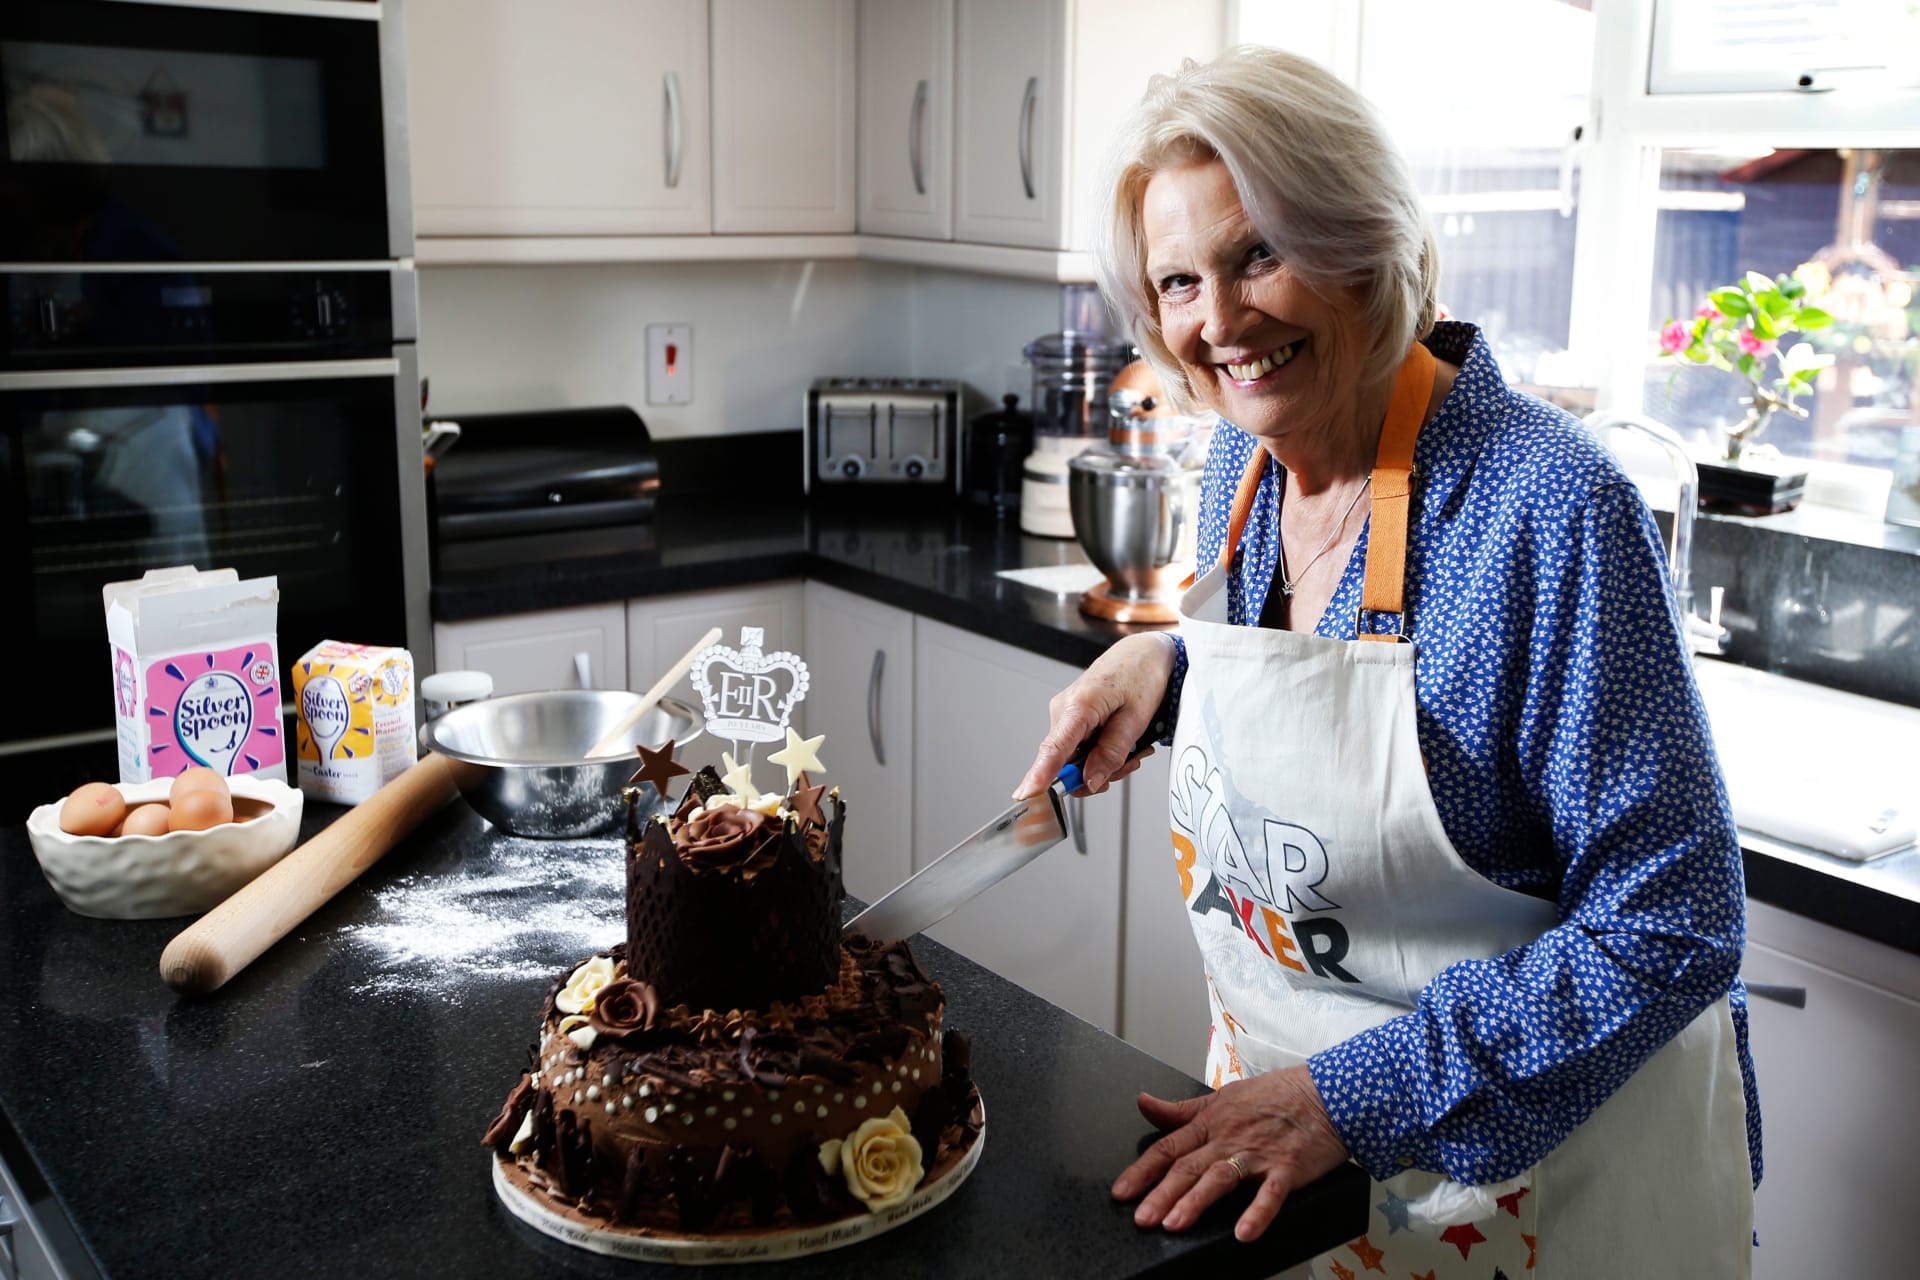 Christine Wallace’s Jubilee Luxury Chocolate Cake - A Cake Fit for a Queen